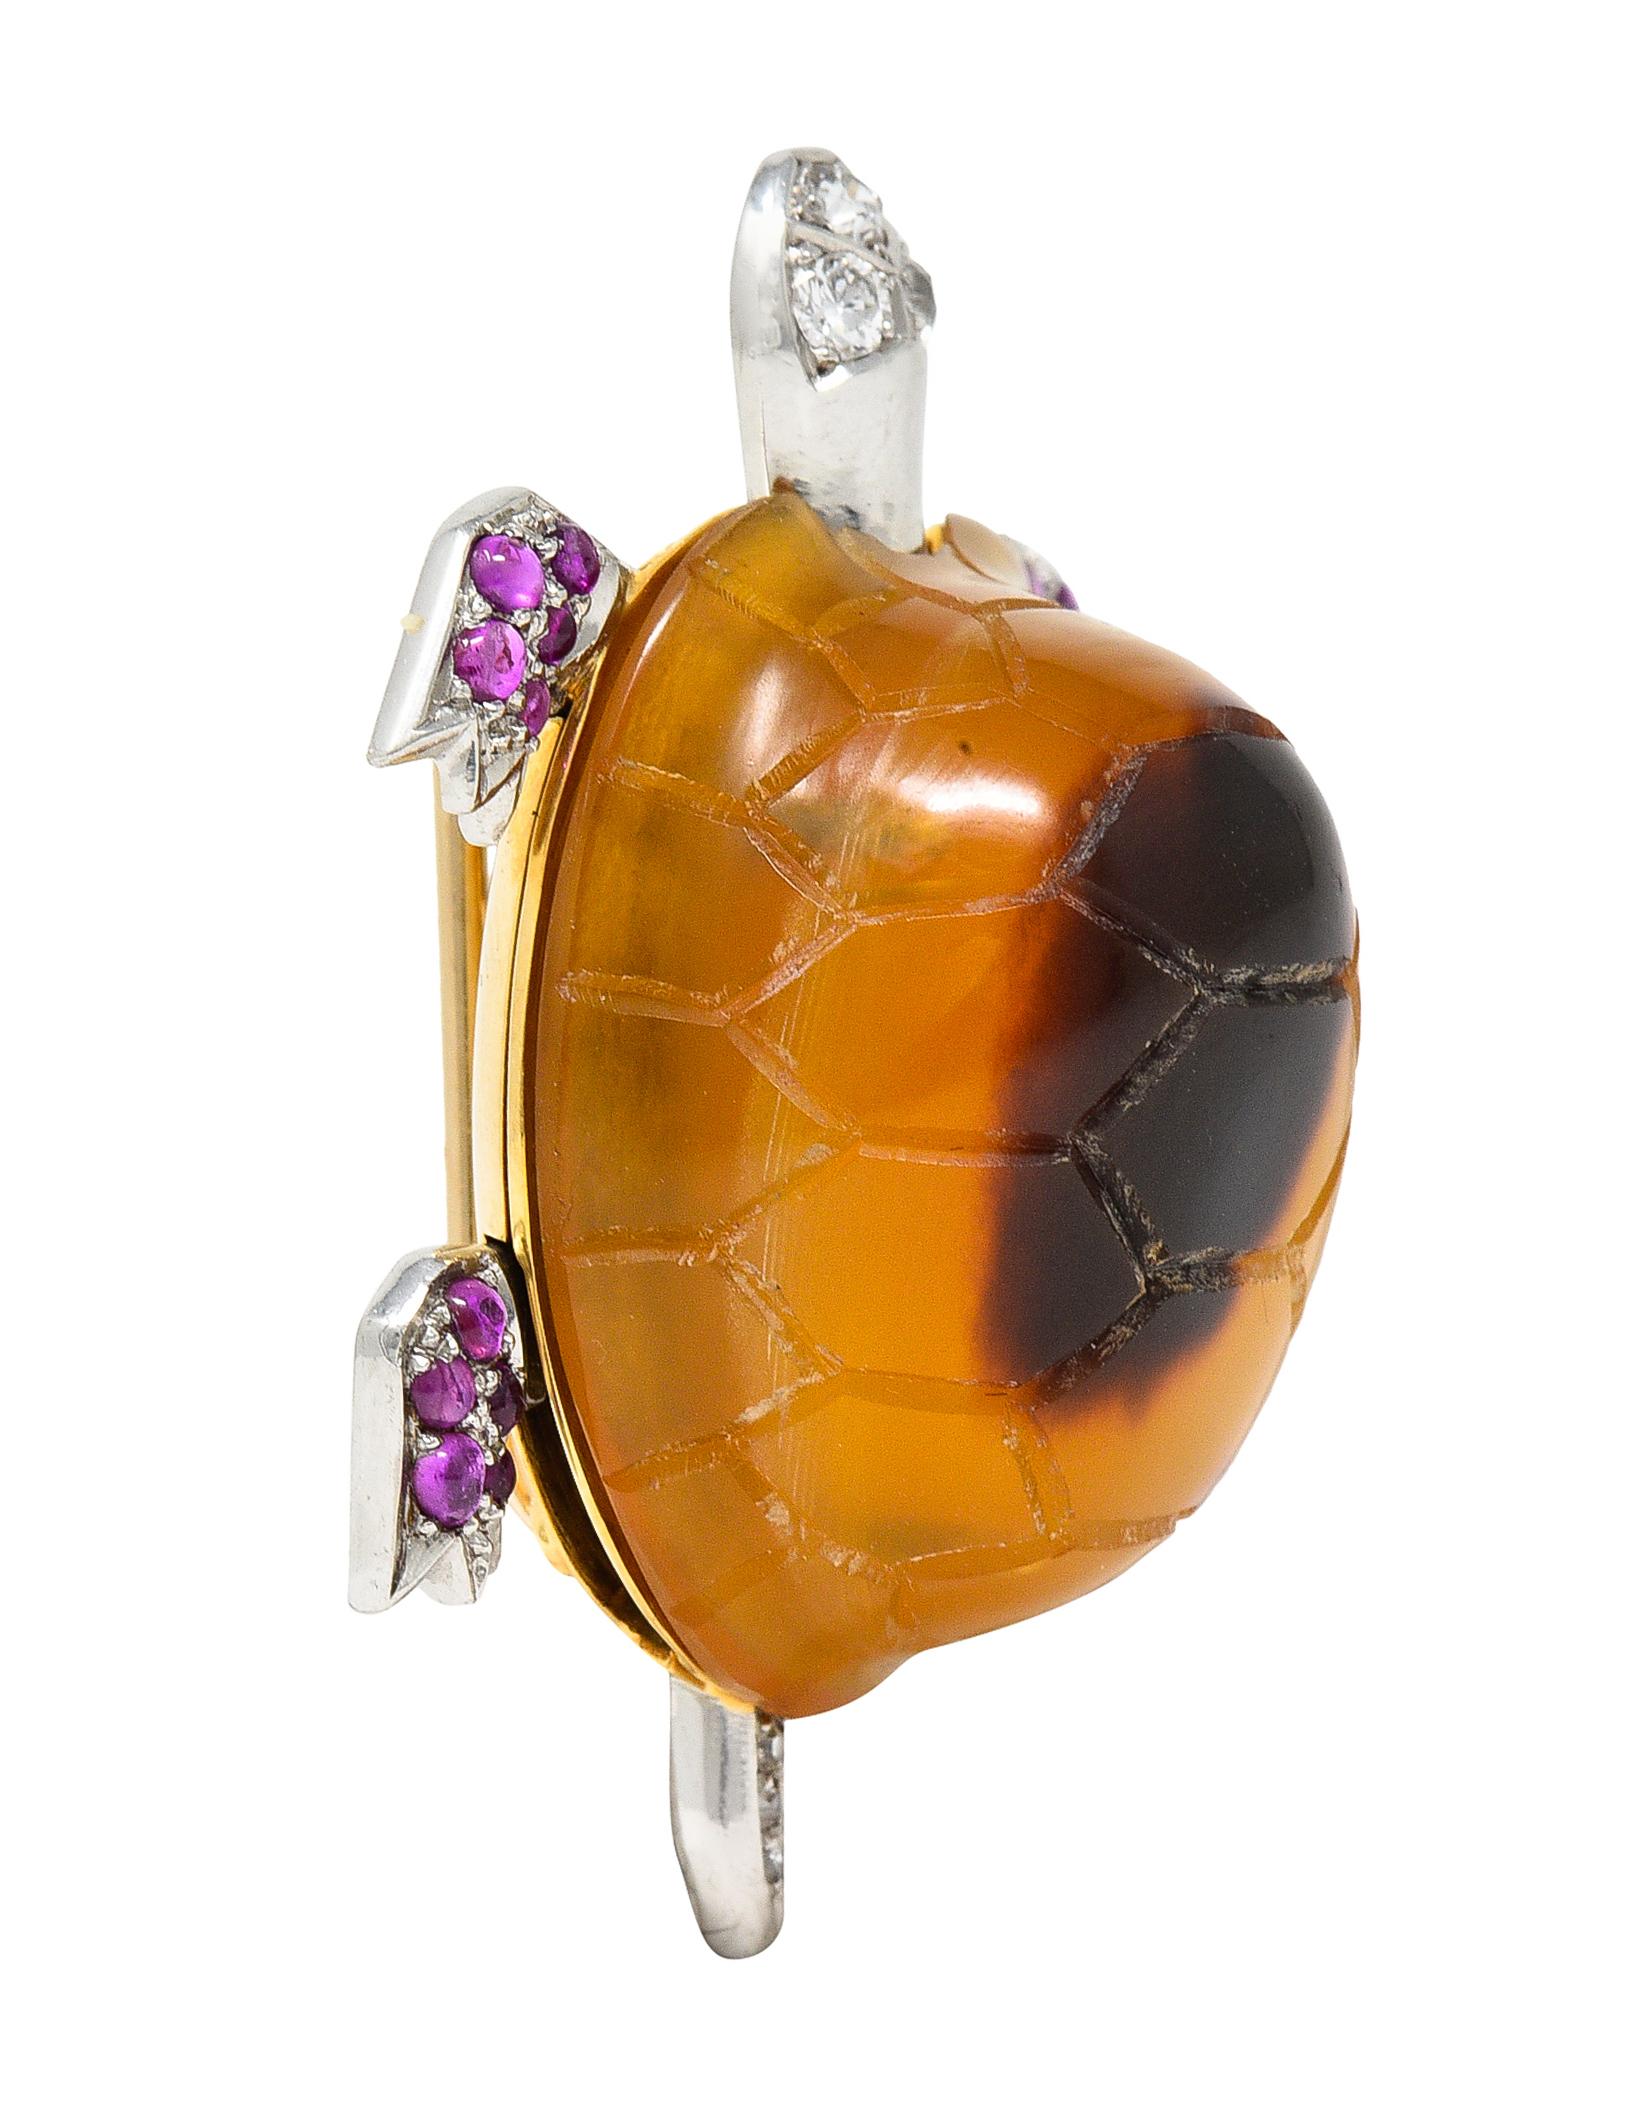 Brooch is designed as a turtle with articulated platinum limbs

Shell is highly domed and comprised of carved tortoise shell

Translucent honey yellow with dark brown spotting

Accented by cabochon rubies and diamonds

Weighing collectively